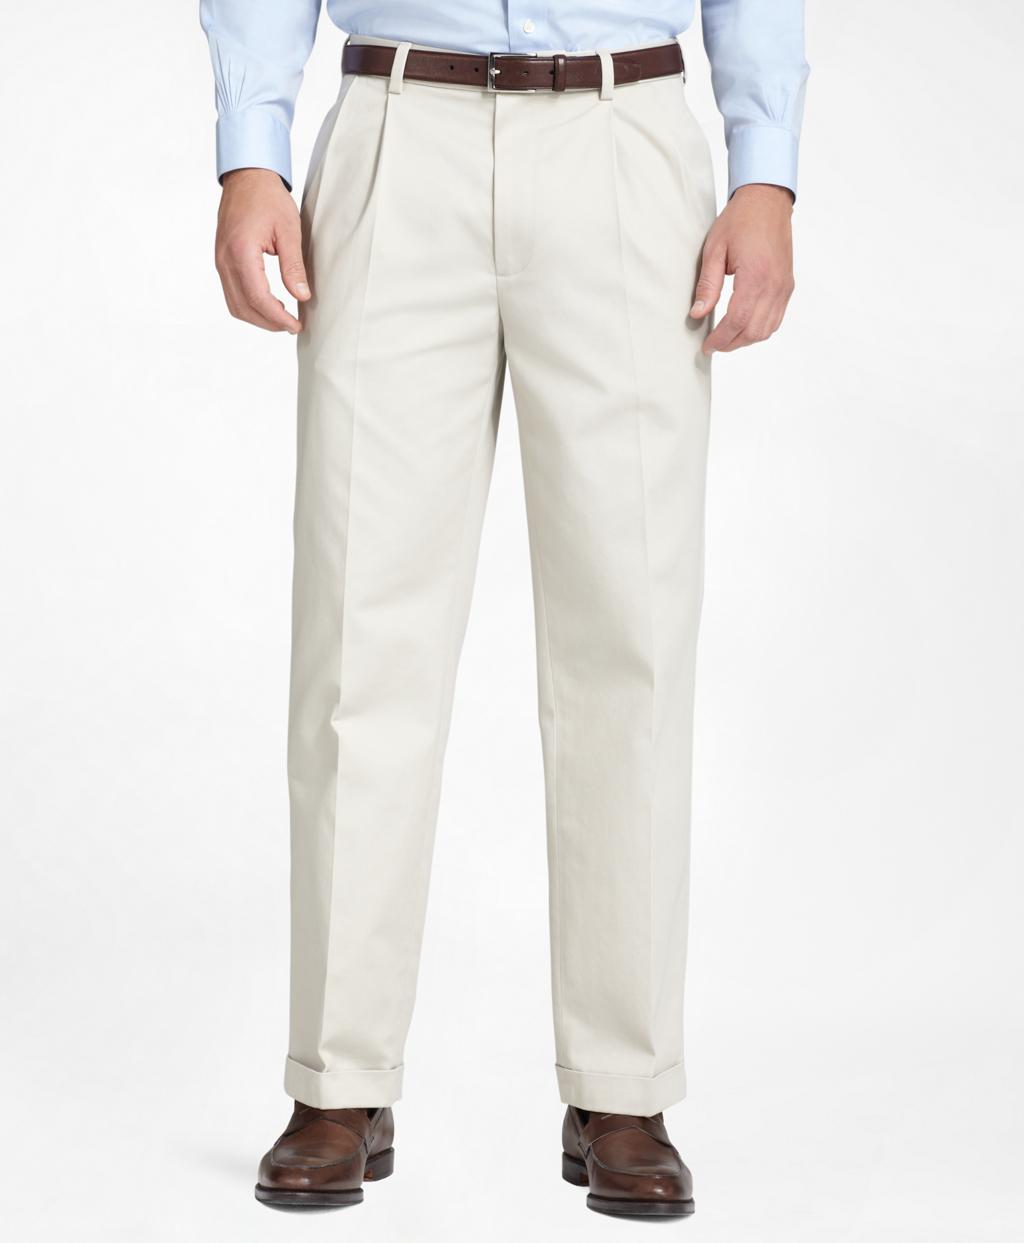 Brooks brothers Elliot Advantage Chinos® in Natural for Men - Save 15% ...